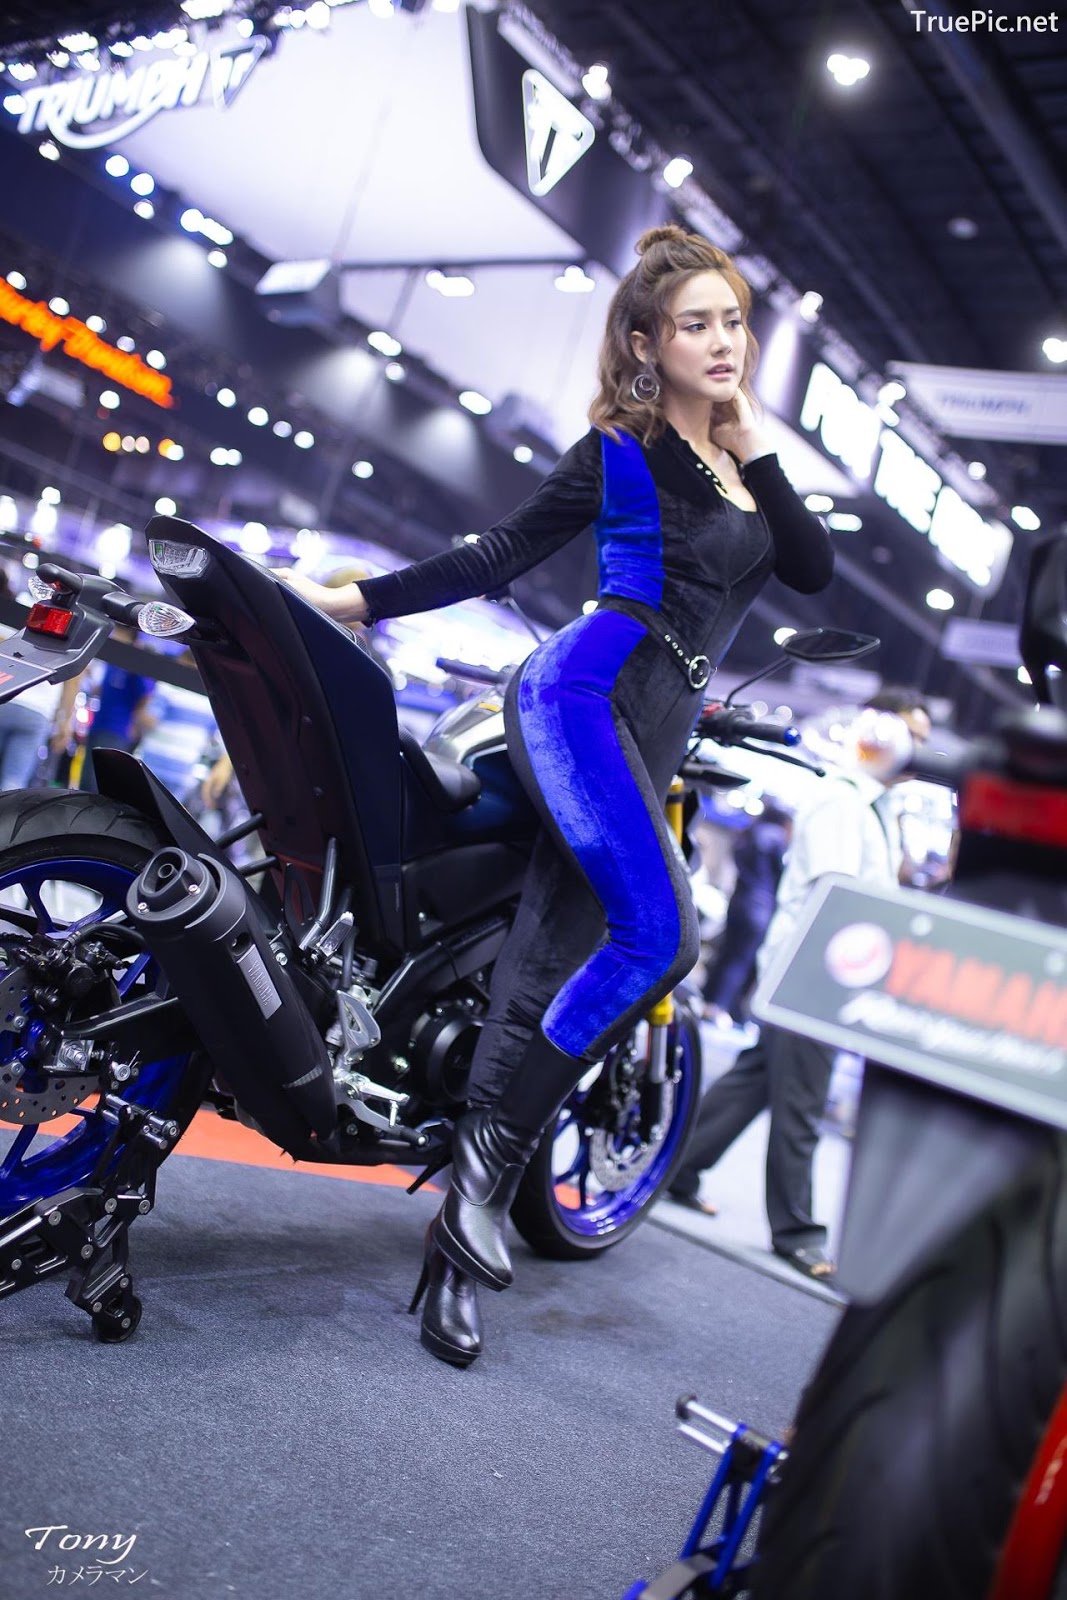 Image-Thailand-Hot-Model-Thai-Racing-Girl-At-Motor-Expo-2018-TruePic.net- Picture-56